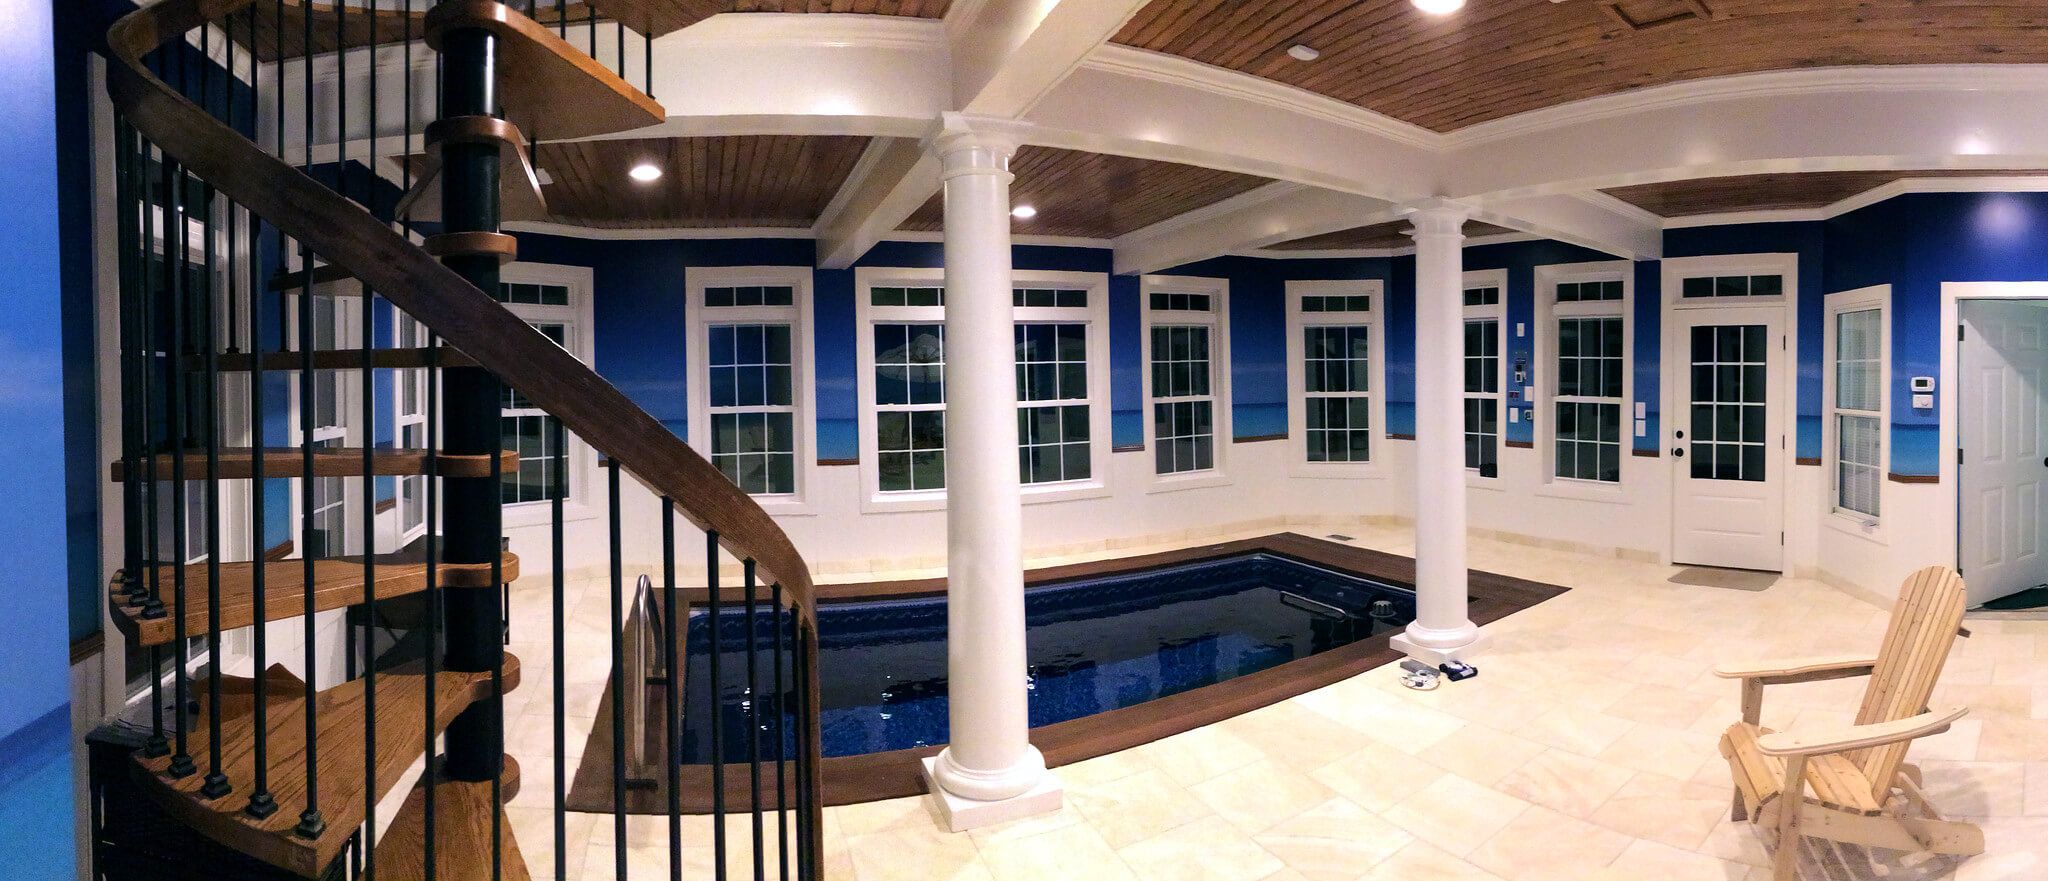 picture of Original Endless Pool installed fully in-ground in a daylight basement